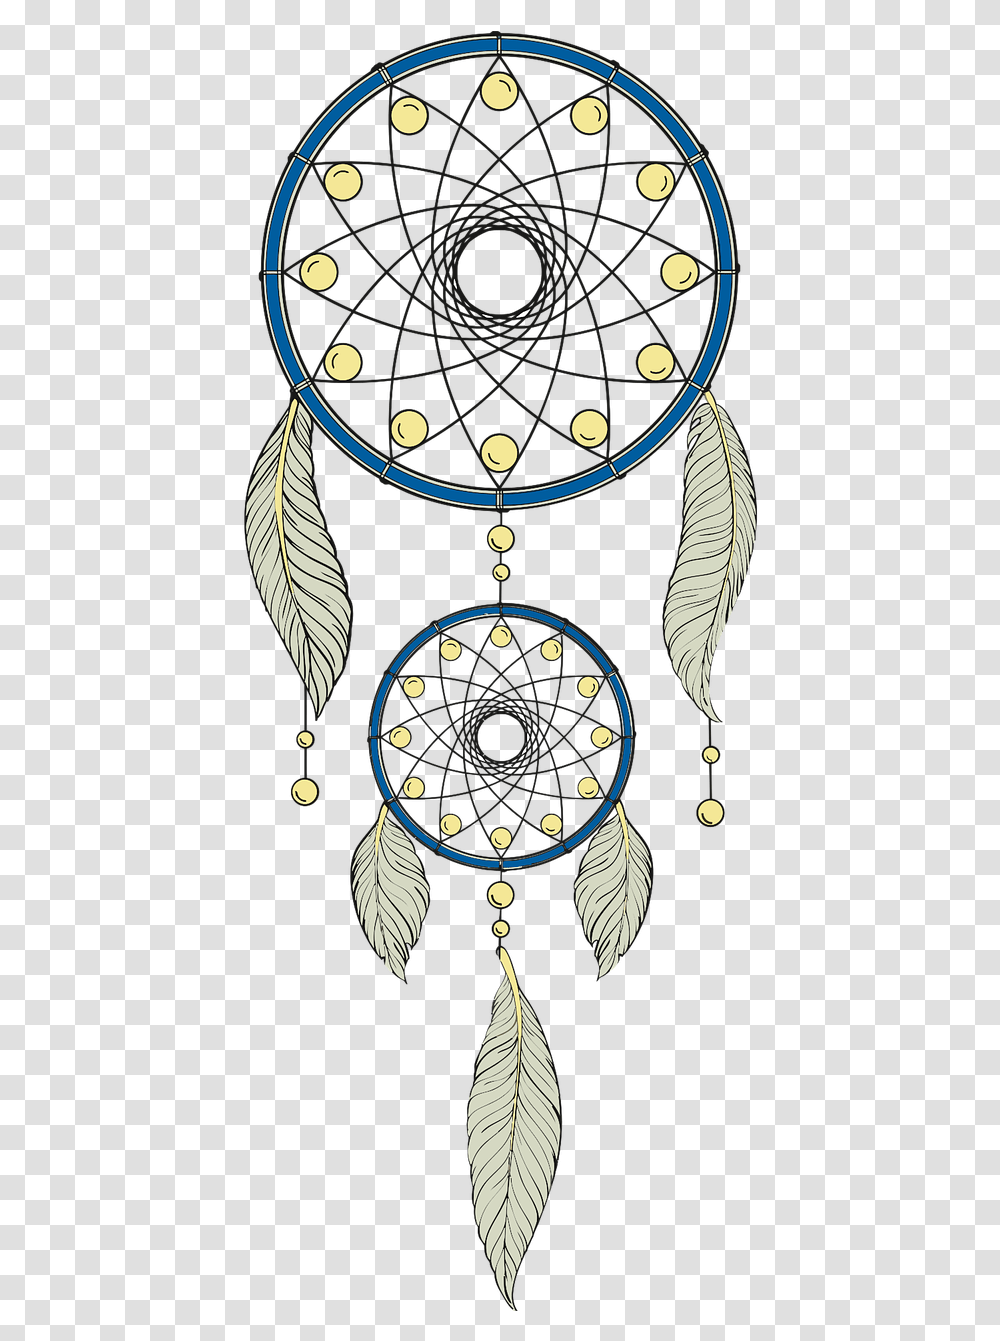 Culture Dream Catcher Dreamcatcher Free Picture Basketball Net From The Top, Ornament, Pattern, Floral Design Transparent Png